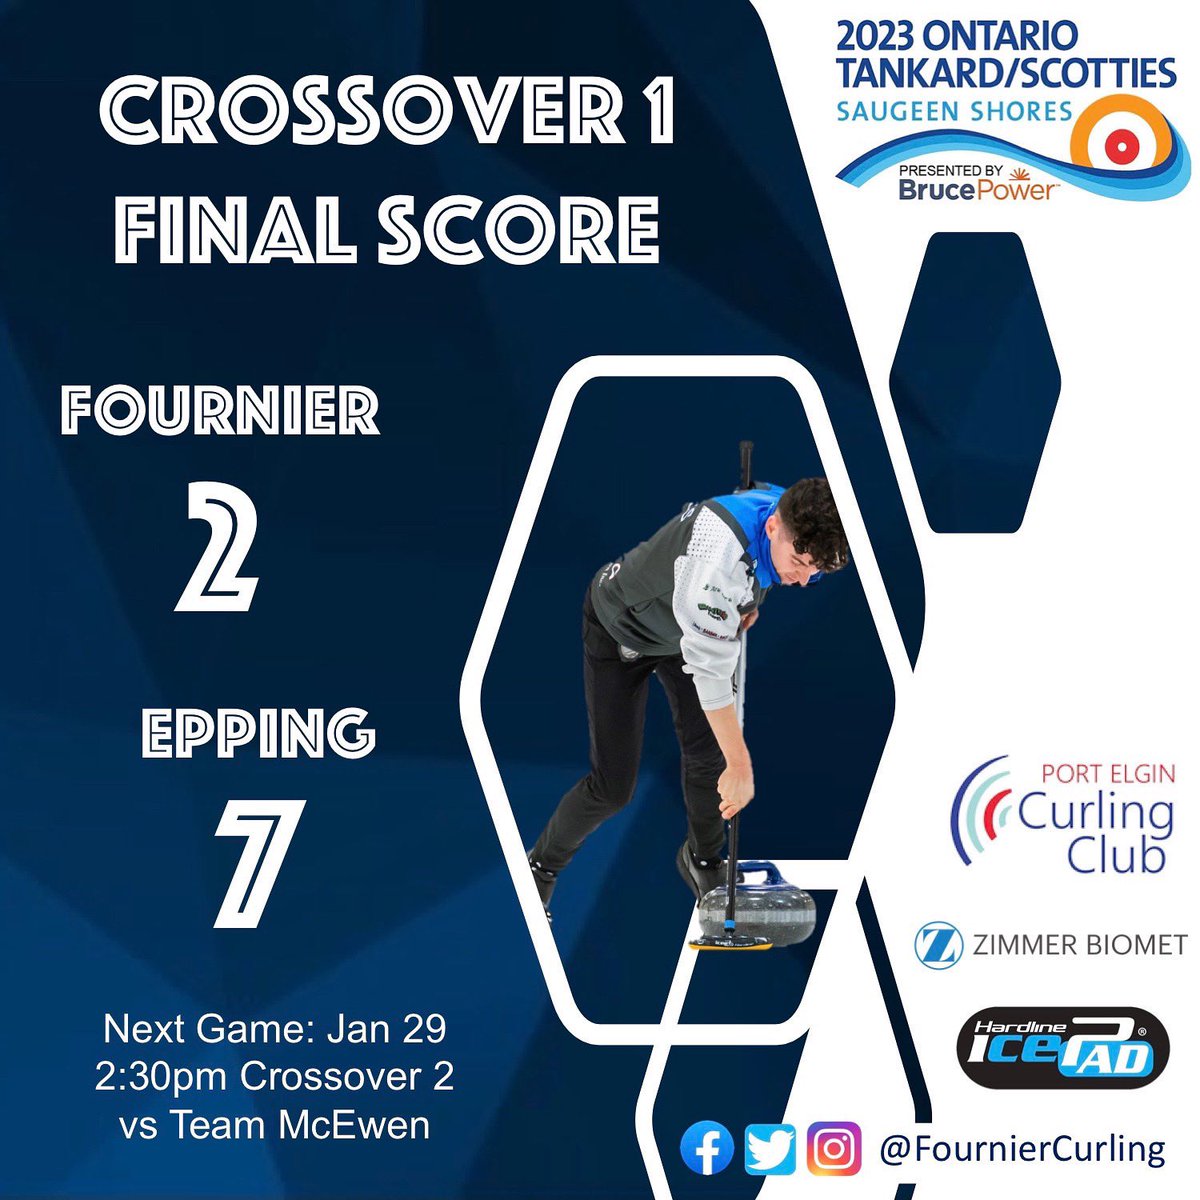 Last night wasn’t our night, BUT we are still alive and in it to win it 💪 A loss to Team Epping in Crossover 1 brings us to a 4-2 record. We play Team McEwen today at 2:30pm. Make some noise for us in the crowd!!
#hardlinenation #fourniercurling #trilliumgrind